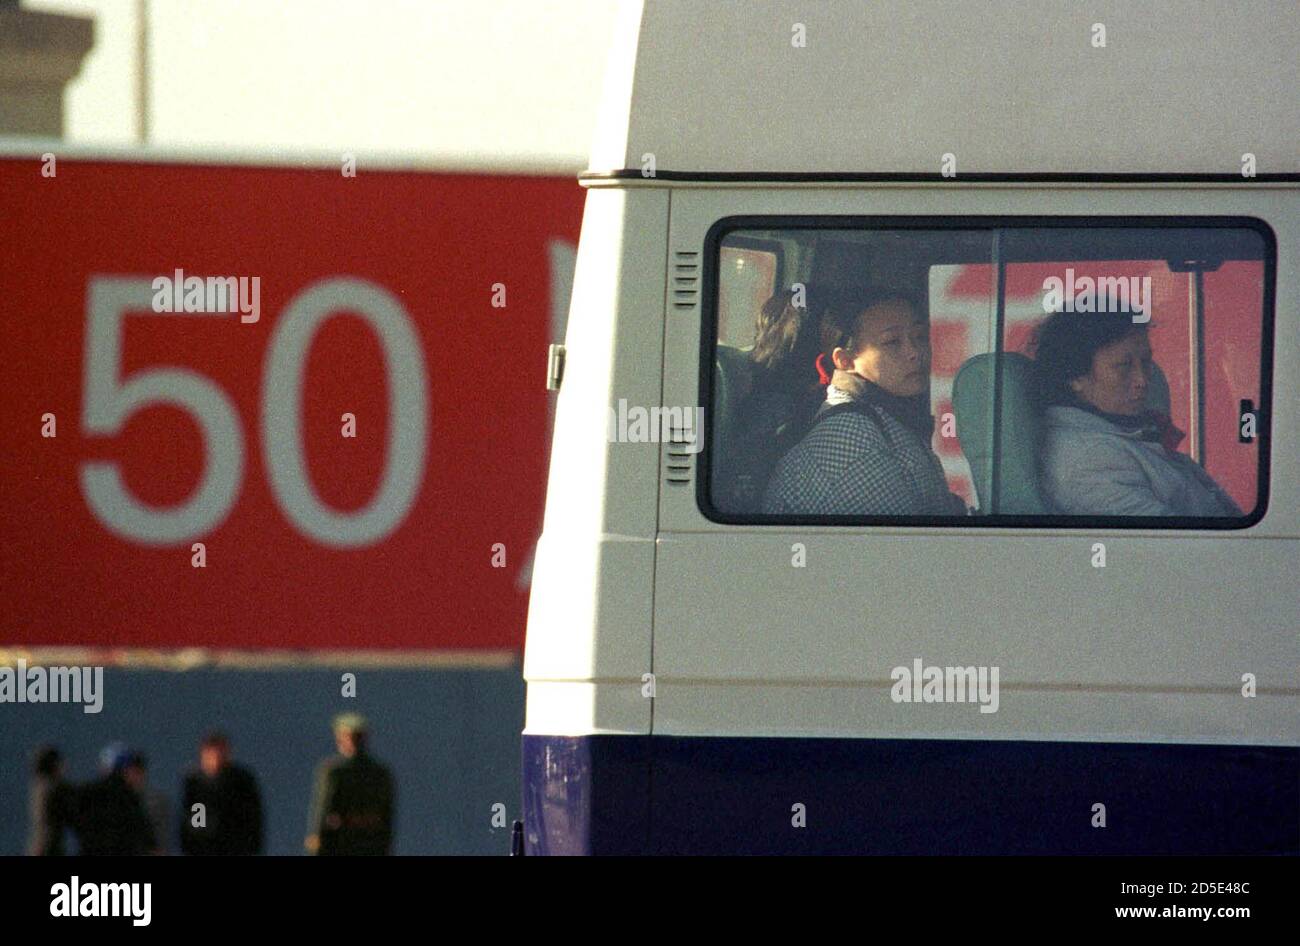 Suspected practitioners of the banned spiritual movement Falun Gong are  detained on a bus in Tiananmen Square in front of a sign celebrating the  50th anniversary of Communist rule in China October